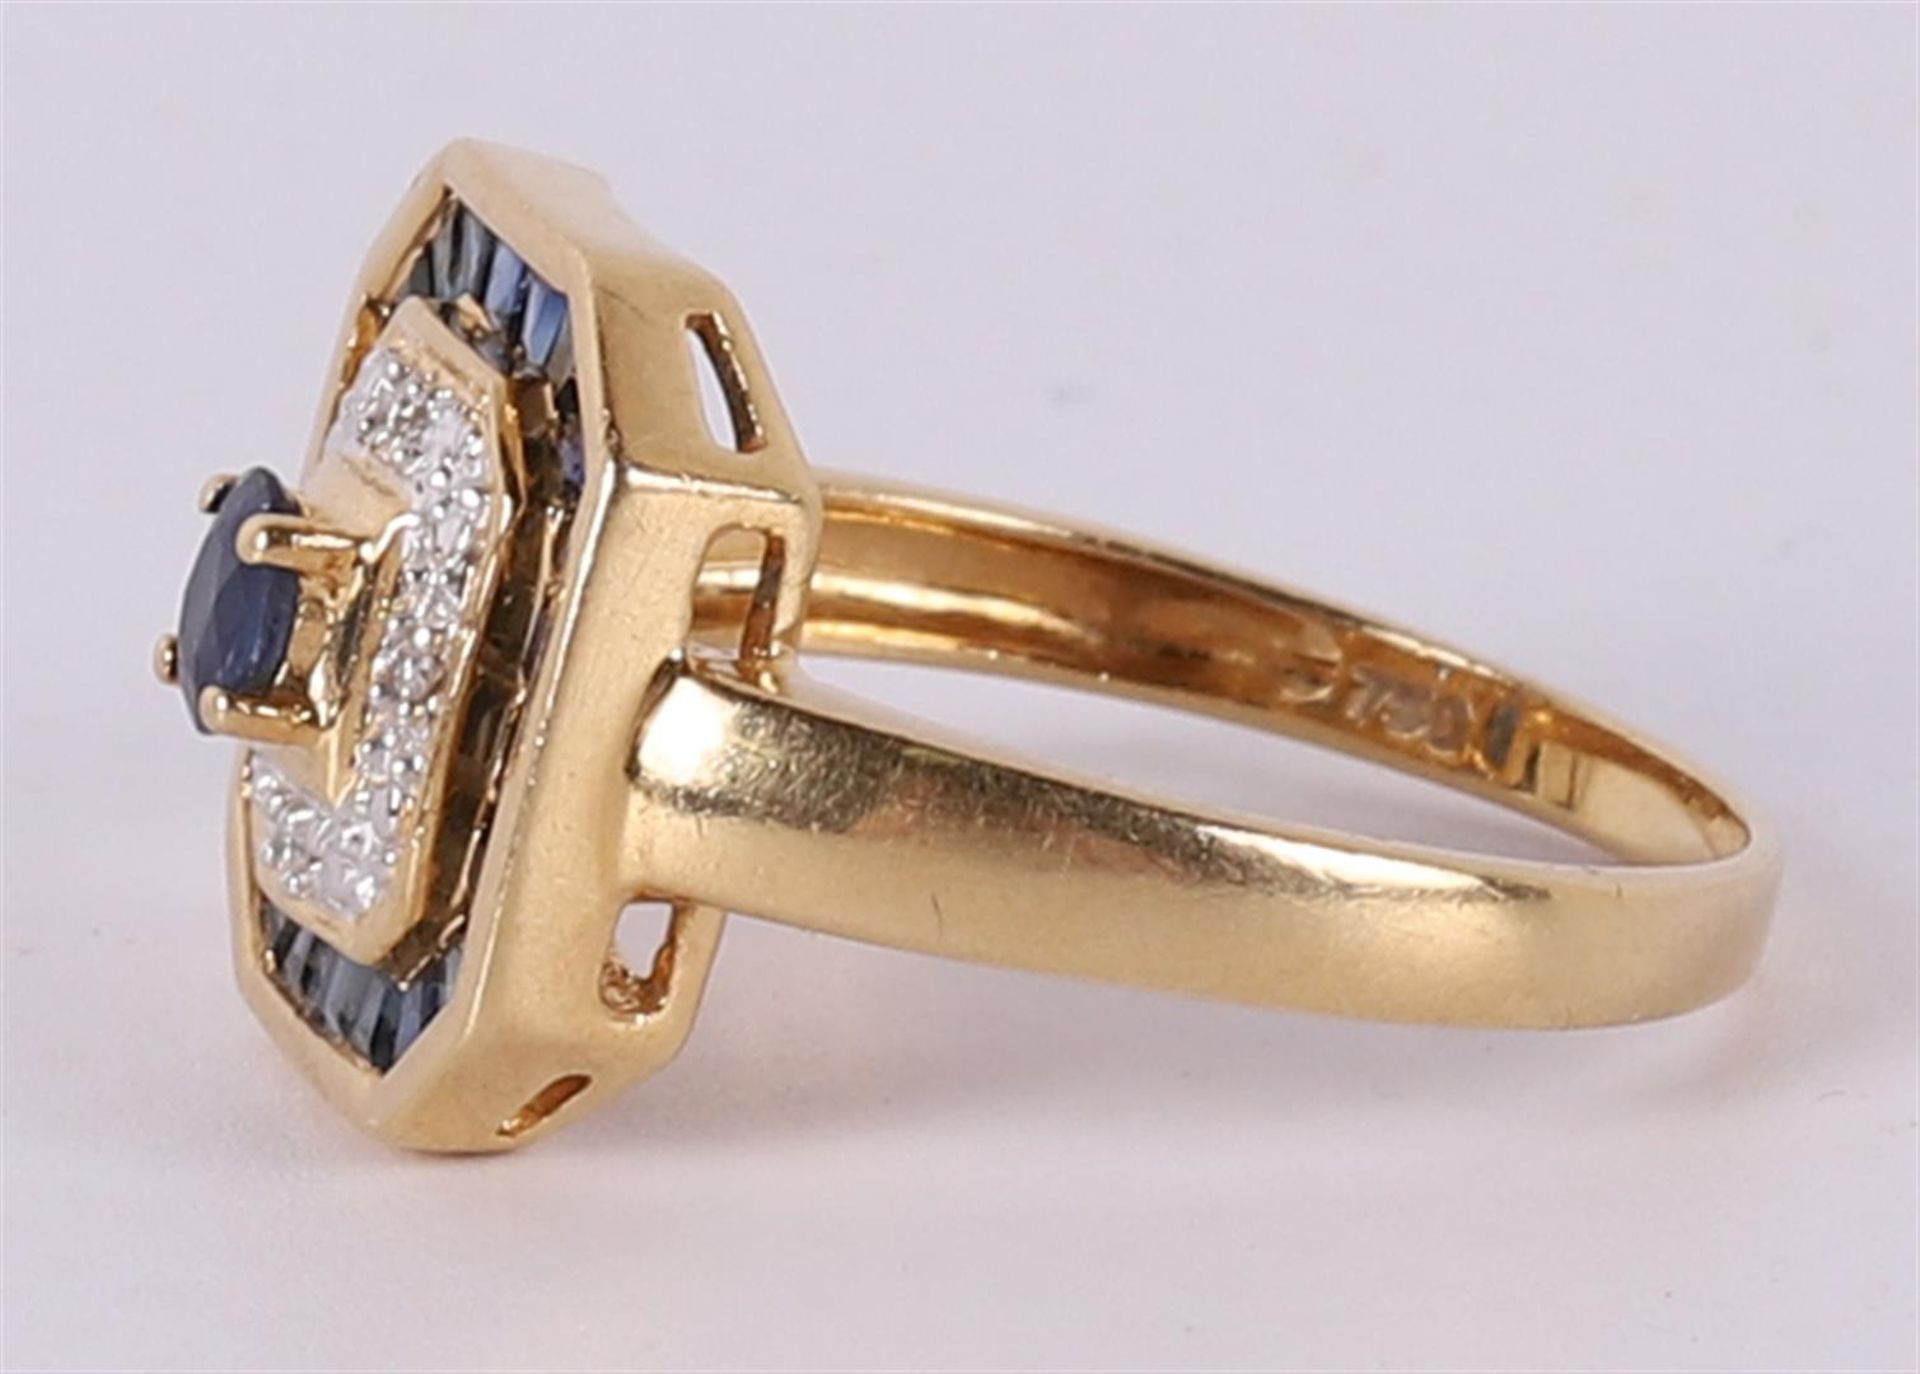 An 18 kt 750/1000 gold ring with 4 brilliants and 23 facet cut blue sapphires. Ring size 18.5 mm. - Image 2 of 2